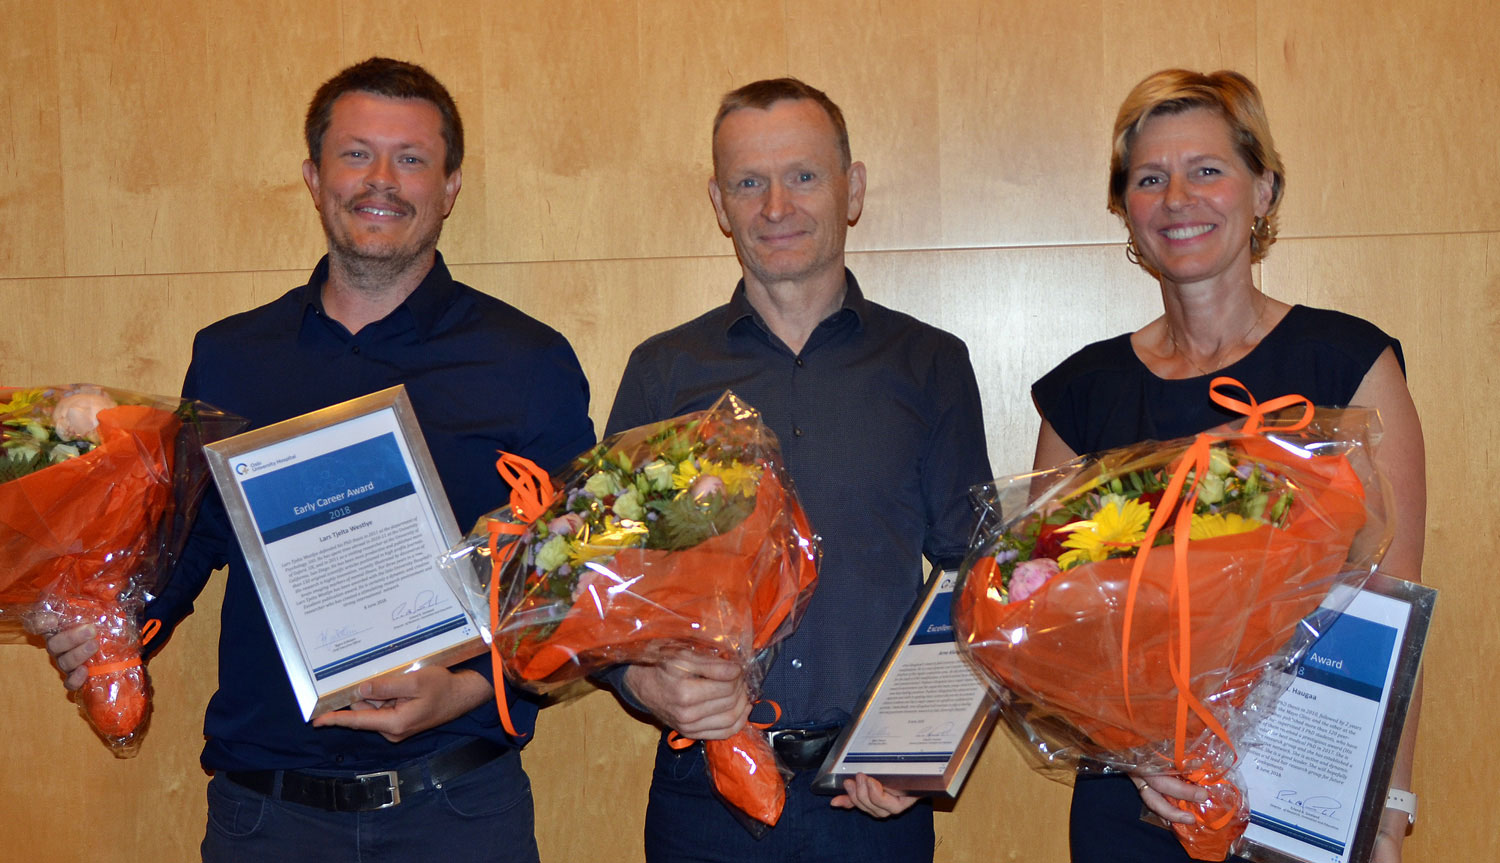 From left: Last T. Westlye, Arne Klungland and  Kristin H. Haugaa.